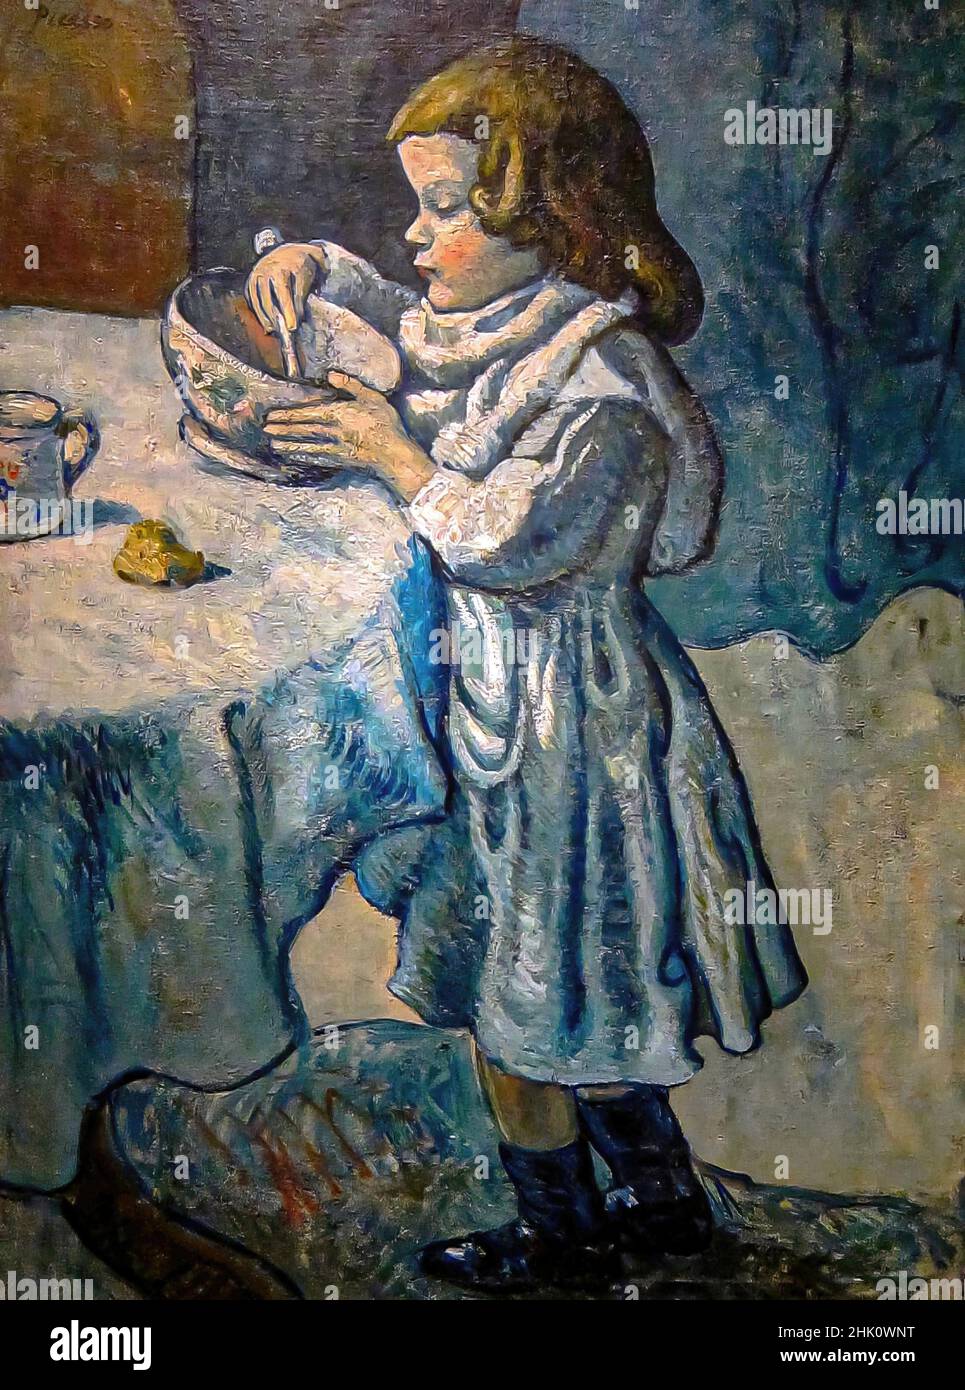 Pablo Ruiz Picasso, Le Gourmet, is an oil painting on canvas 1901 - by Artist Pablo Picasso (1881 –1973). National Gallery of Art, Washington DC, Stock Photo